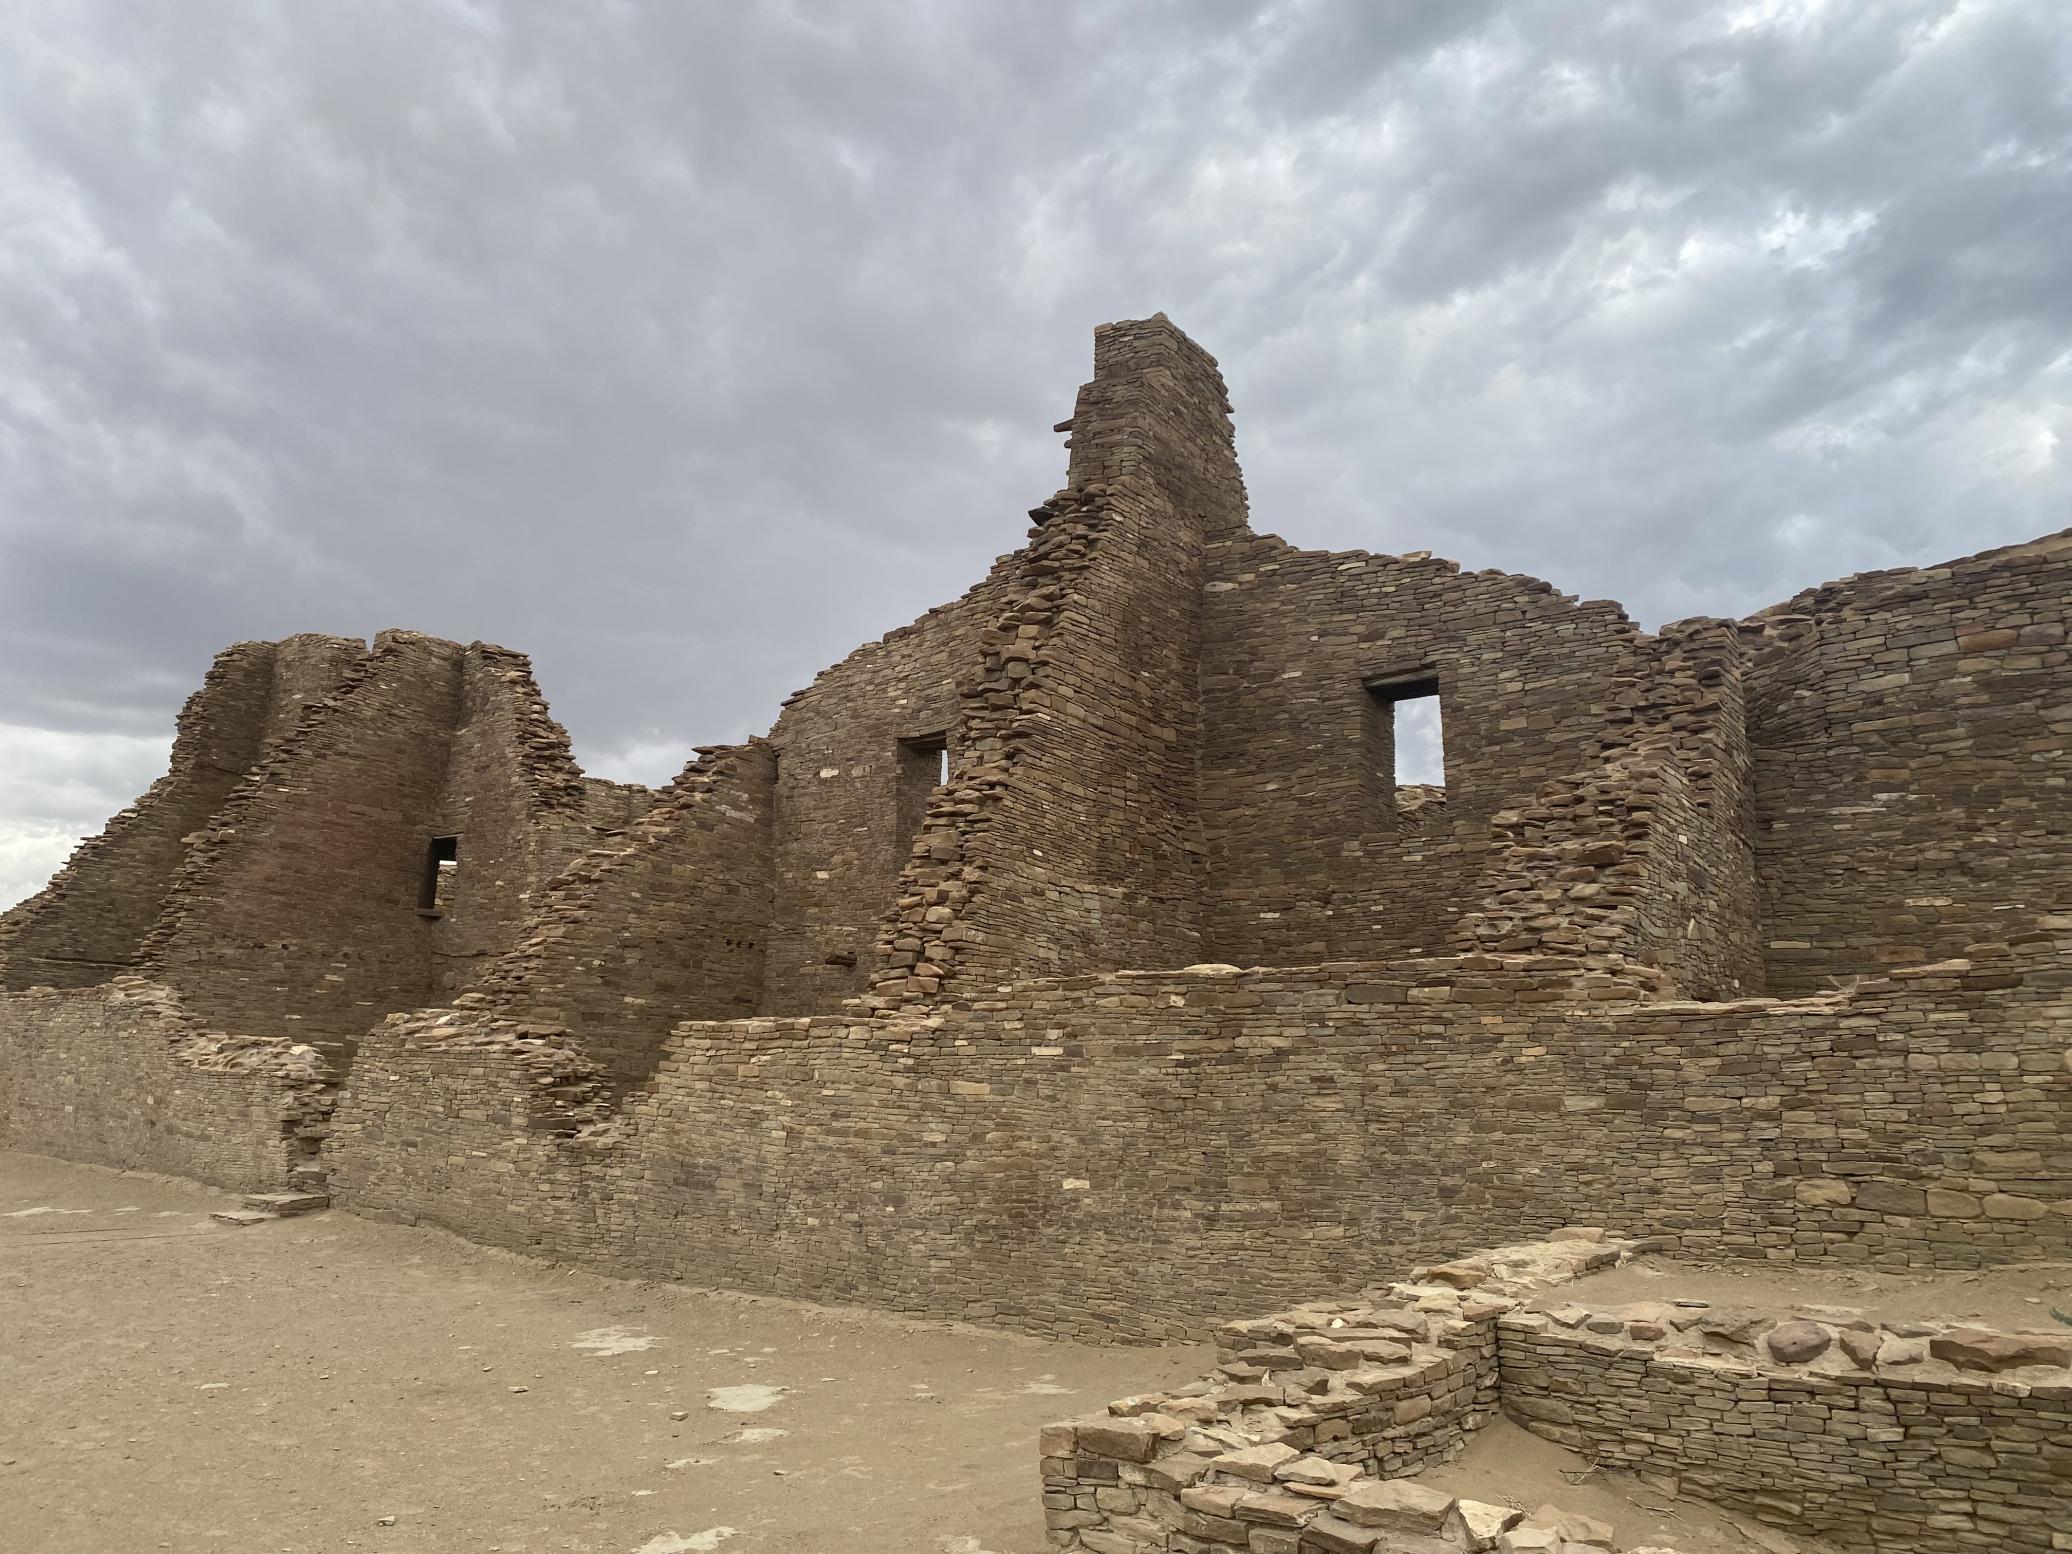 "This photo was taken at Chaco Culture National Historical Park. Pueblo Bonito is one of the oldest Pueblos in the US, and with UGA Interdisciplinary Field Program, I was able to see sites like this and many more!" -Sydney Thornton